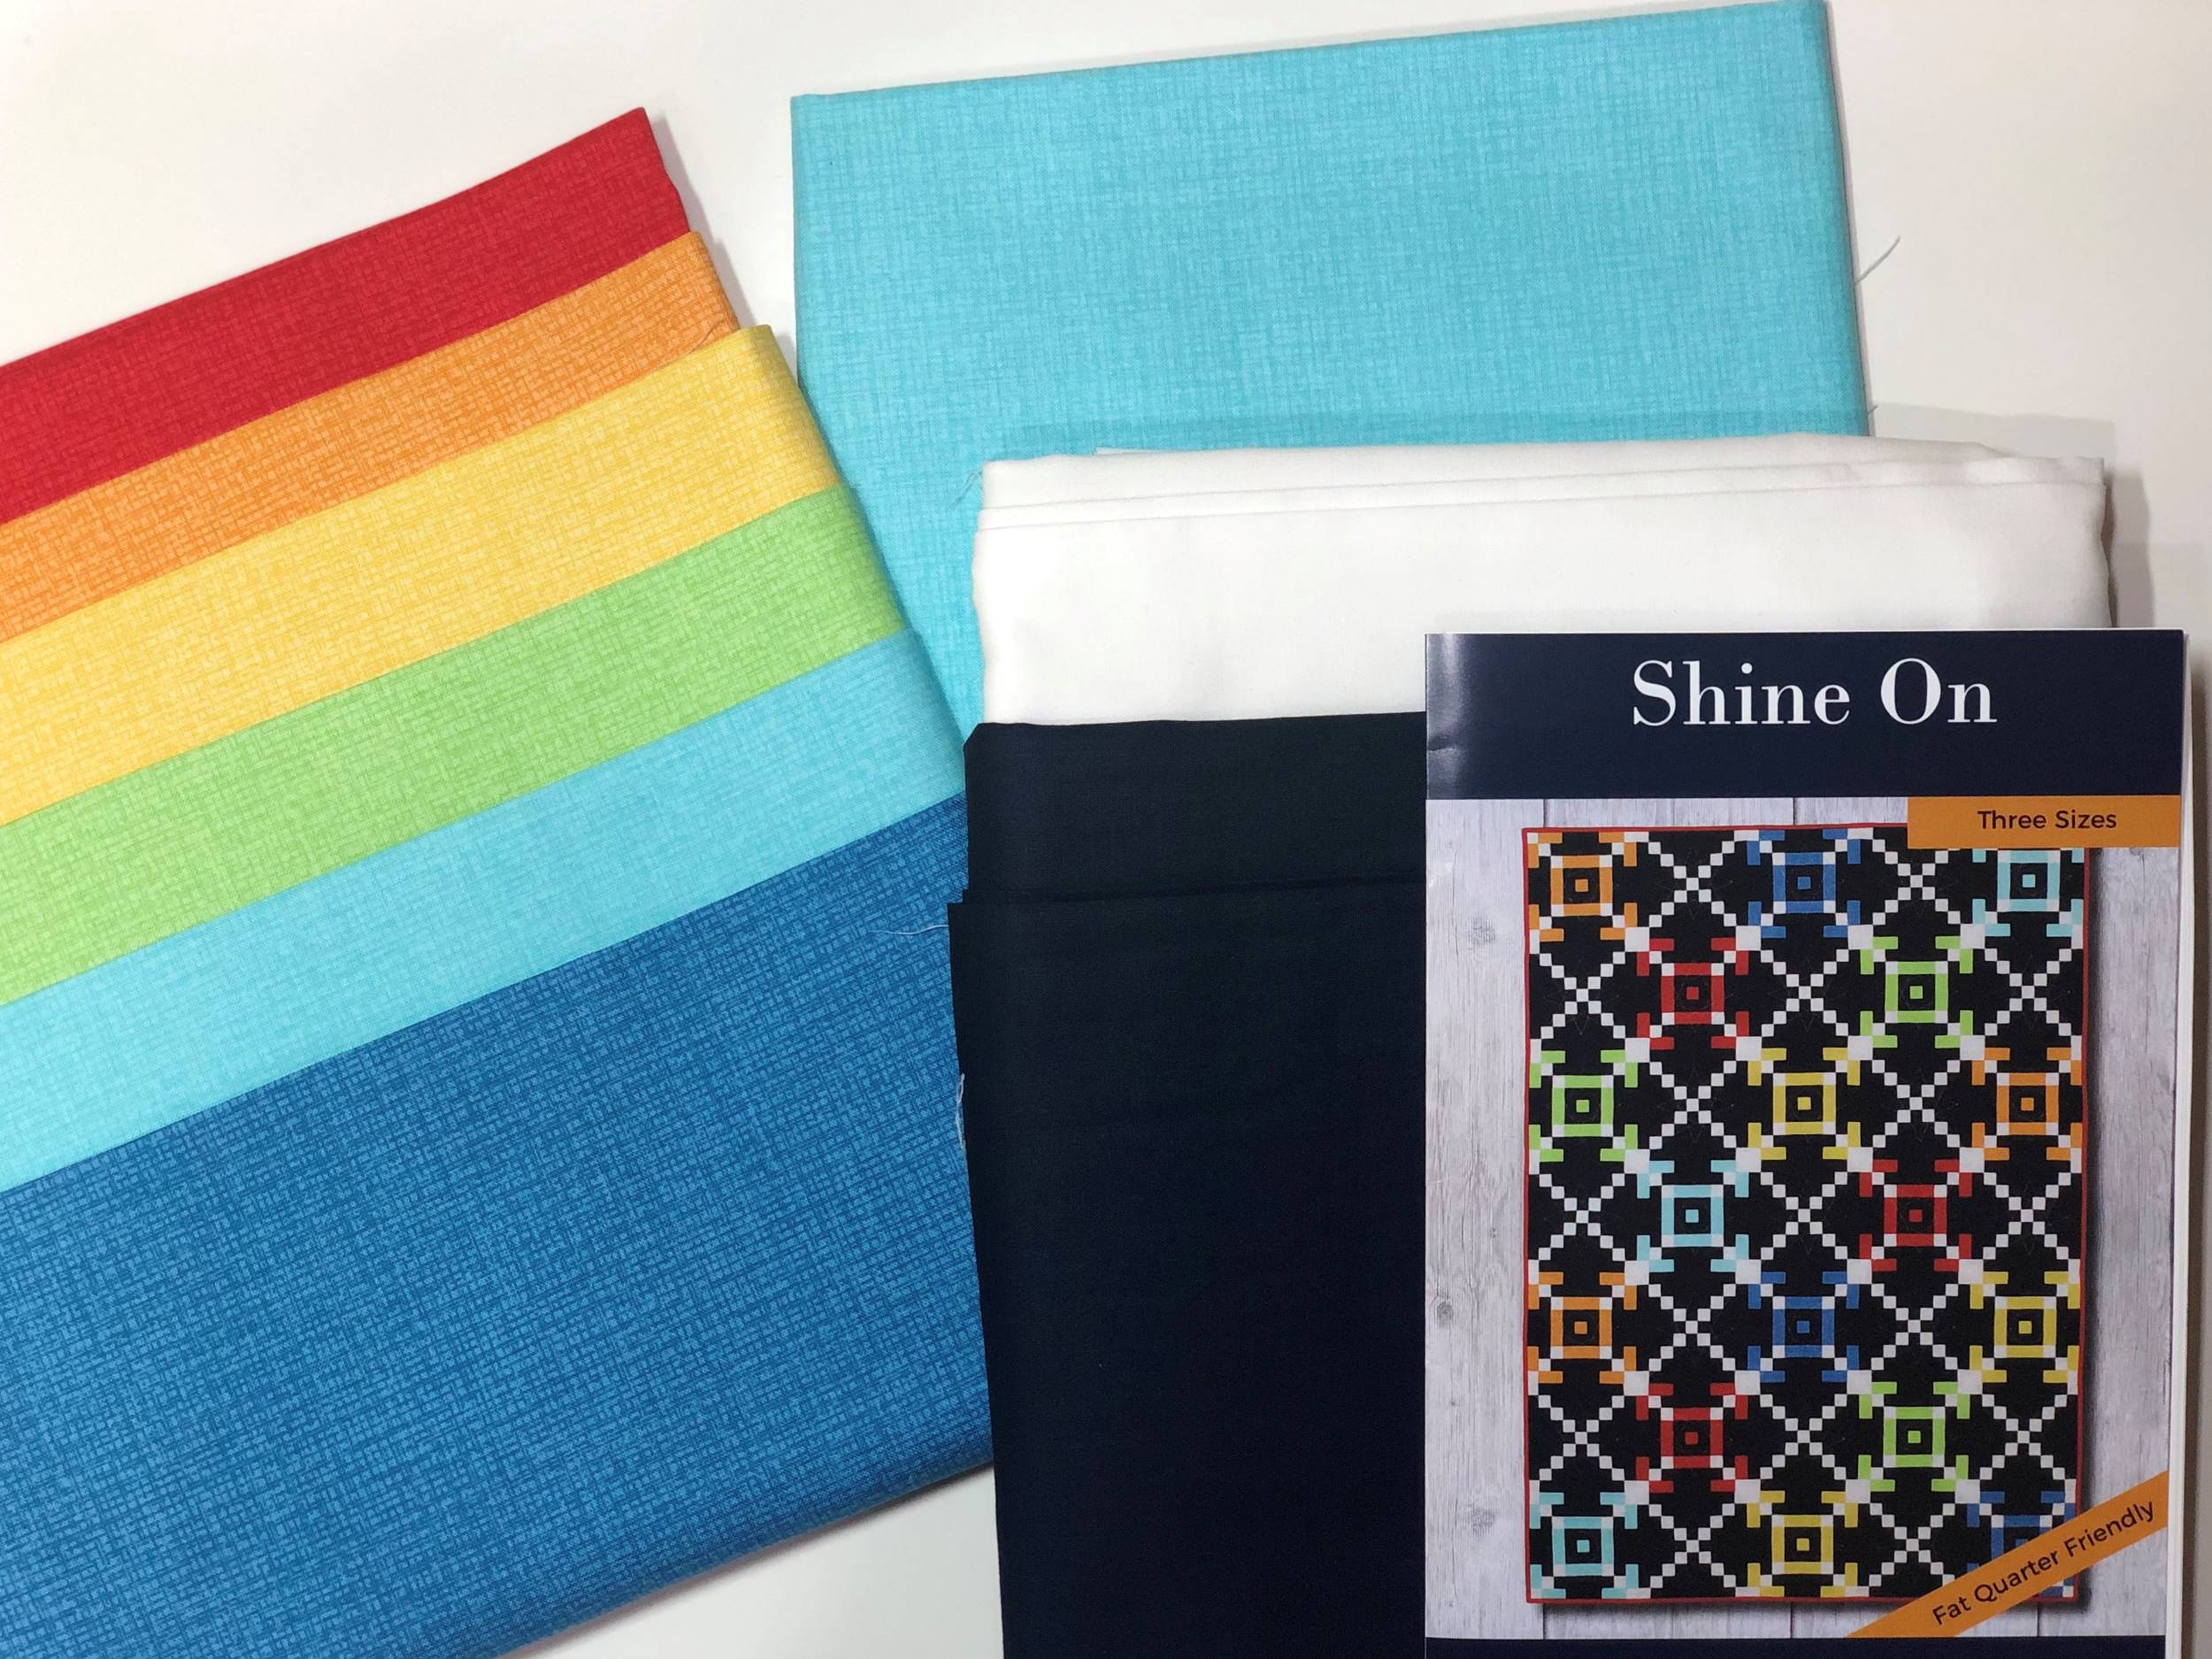 Shine On Quilt Kit Components